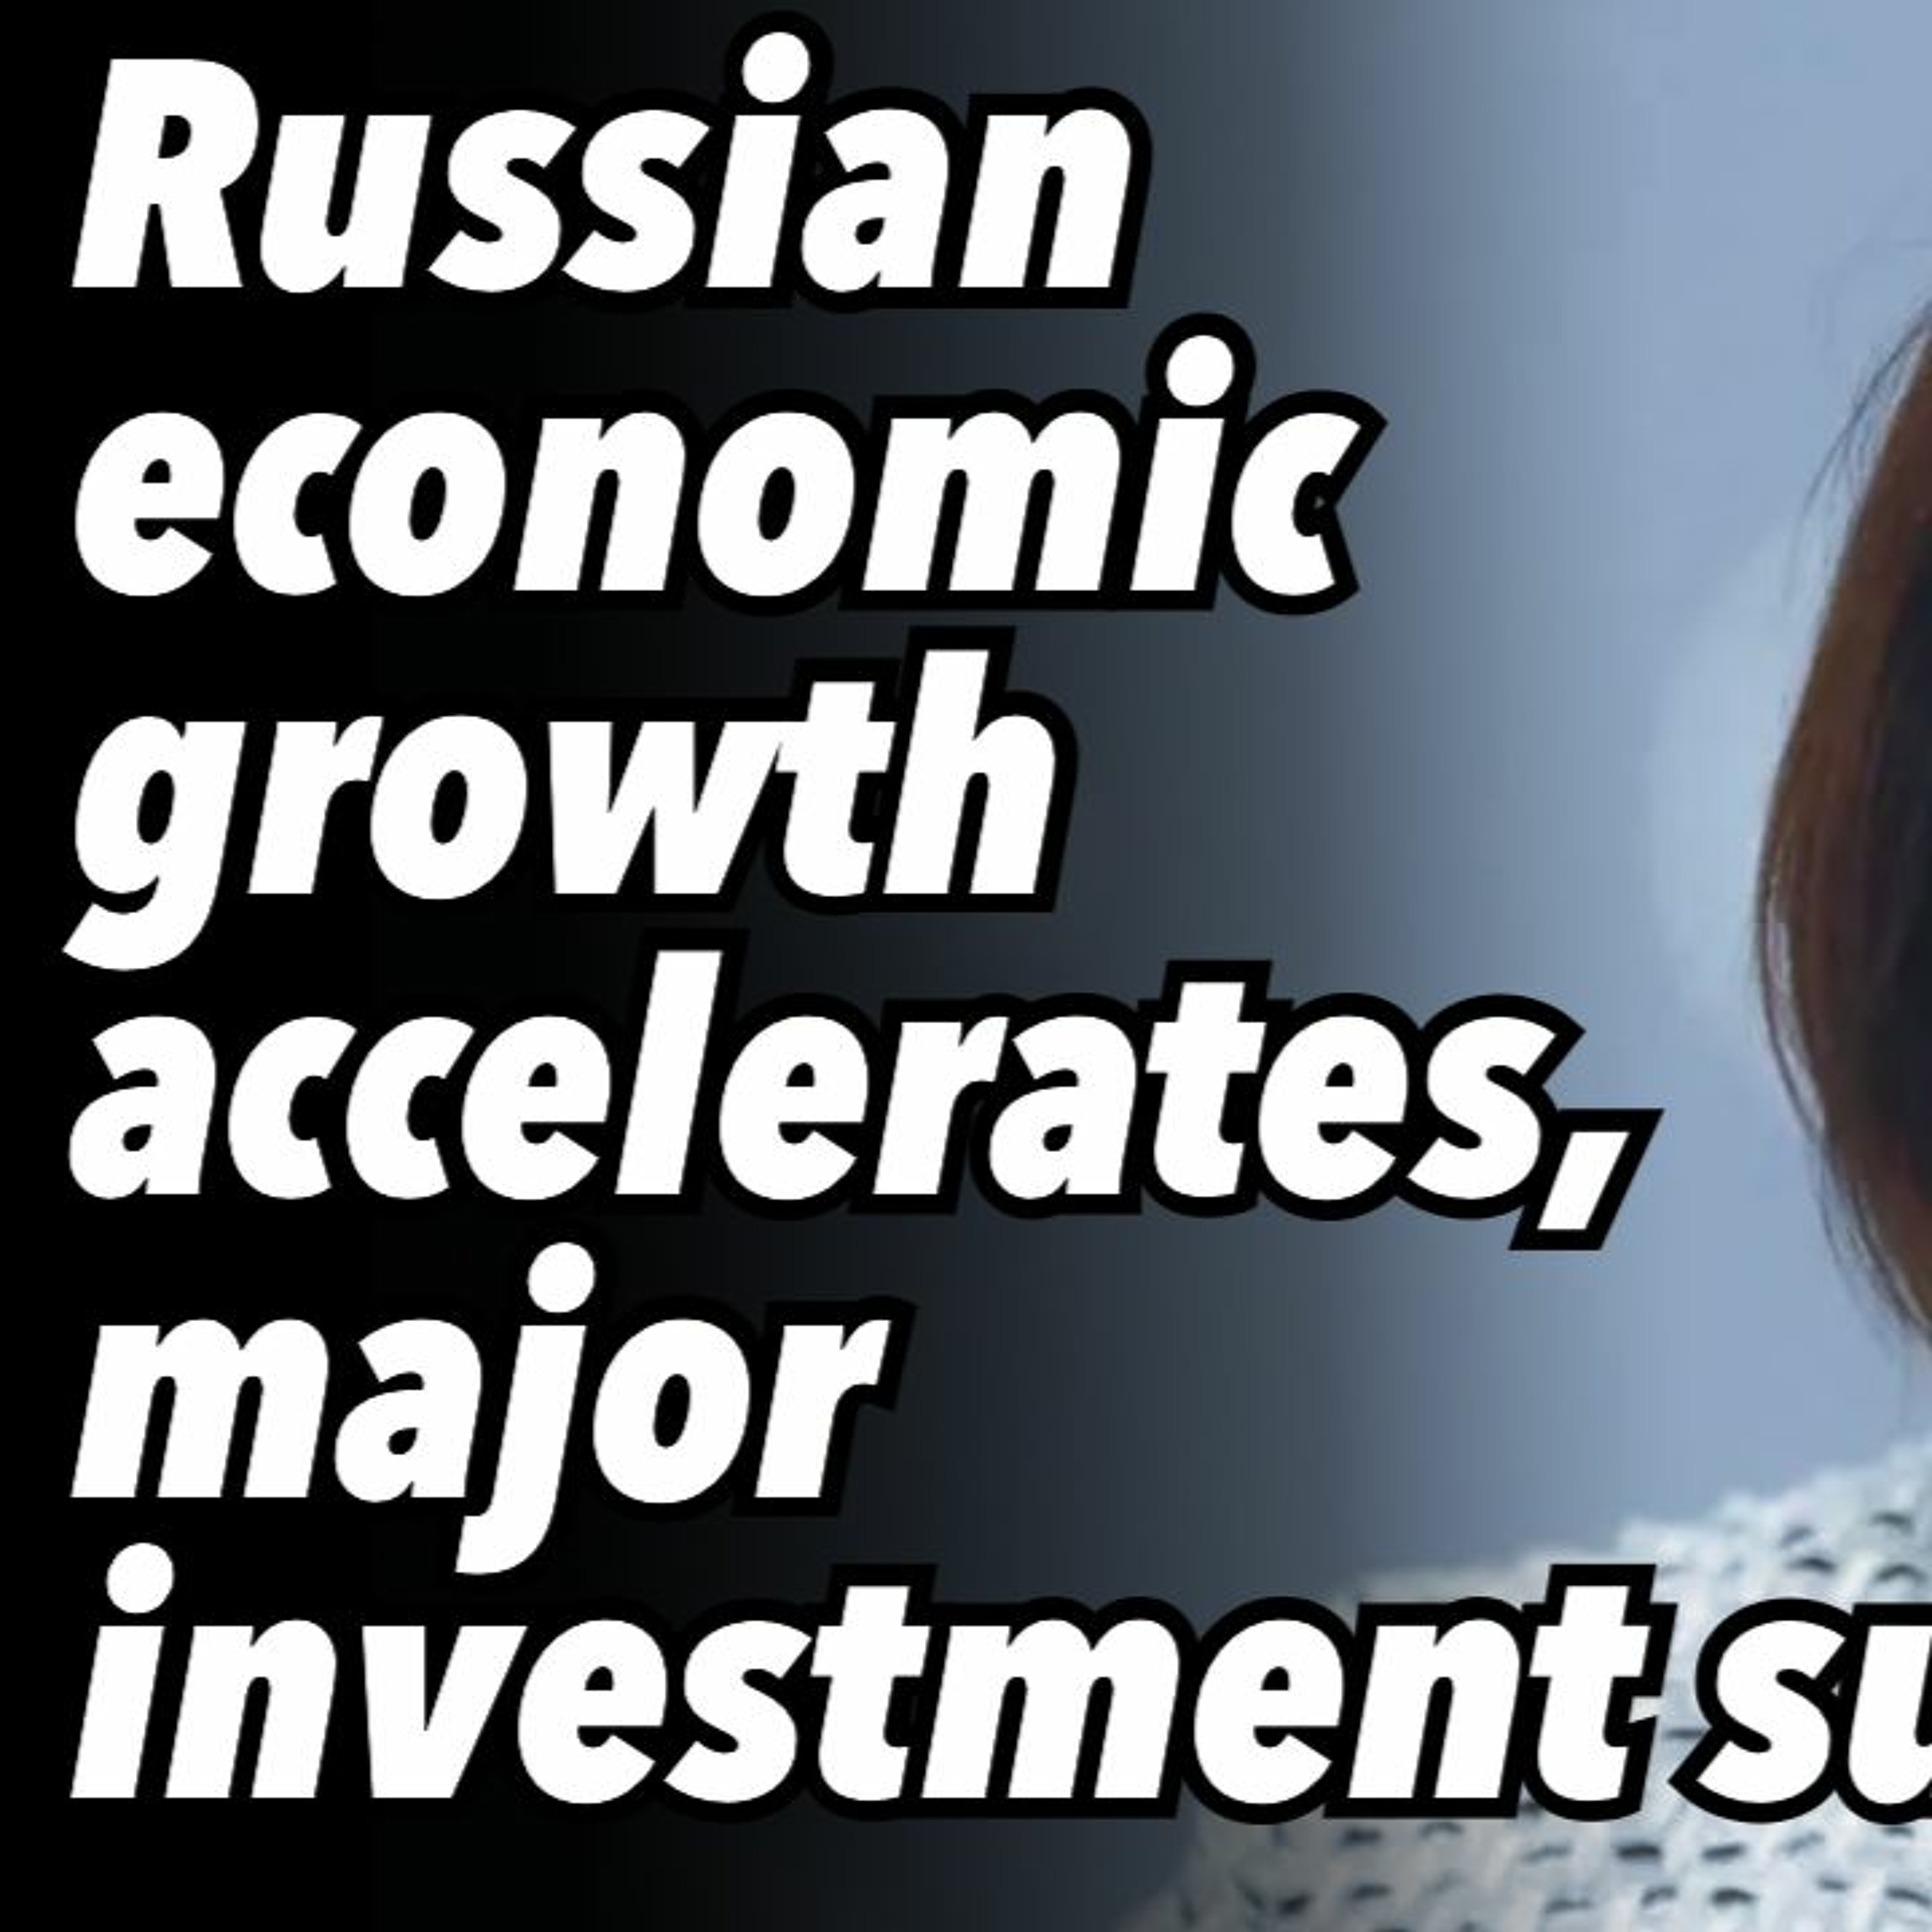 Russian economic growth accelerates, major investment surge